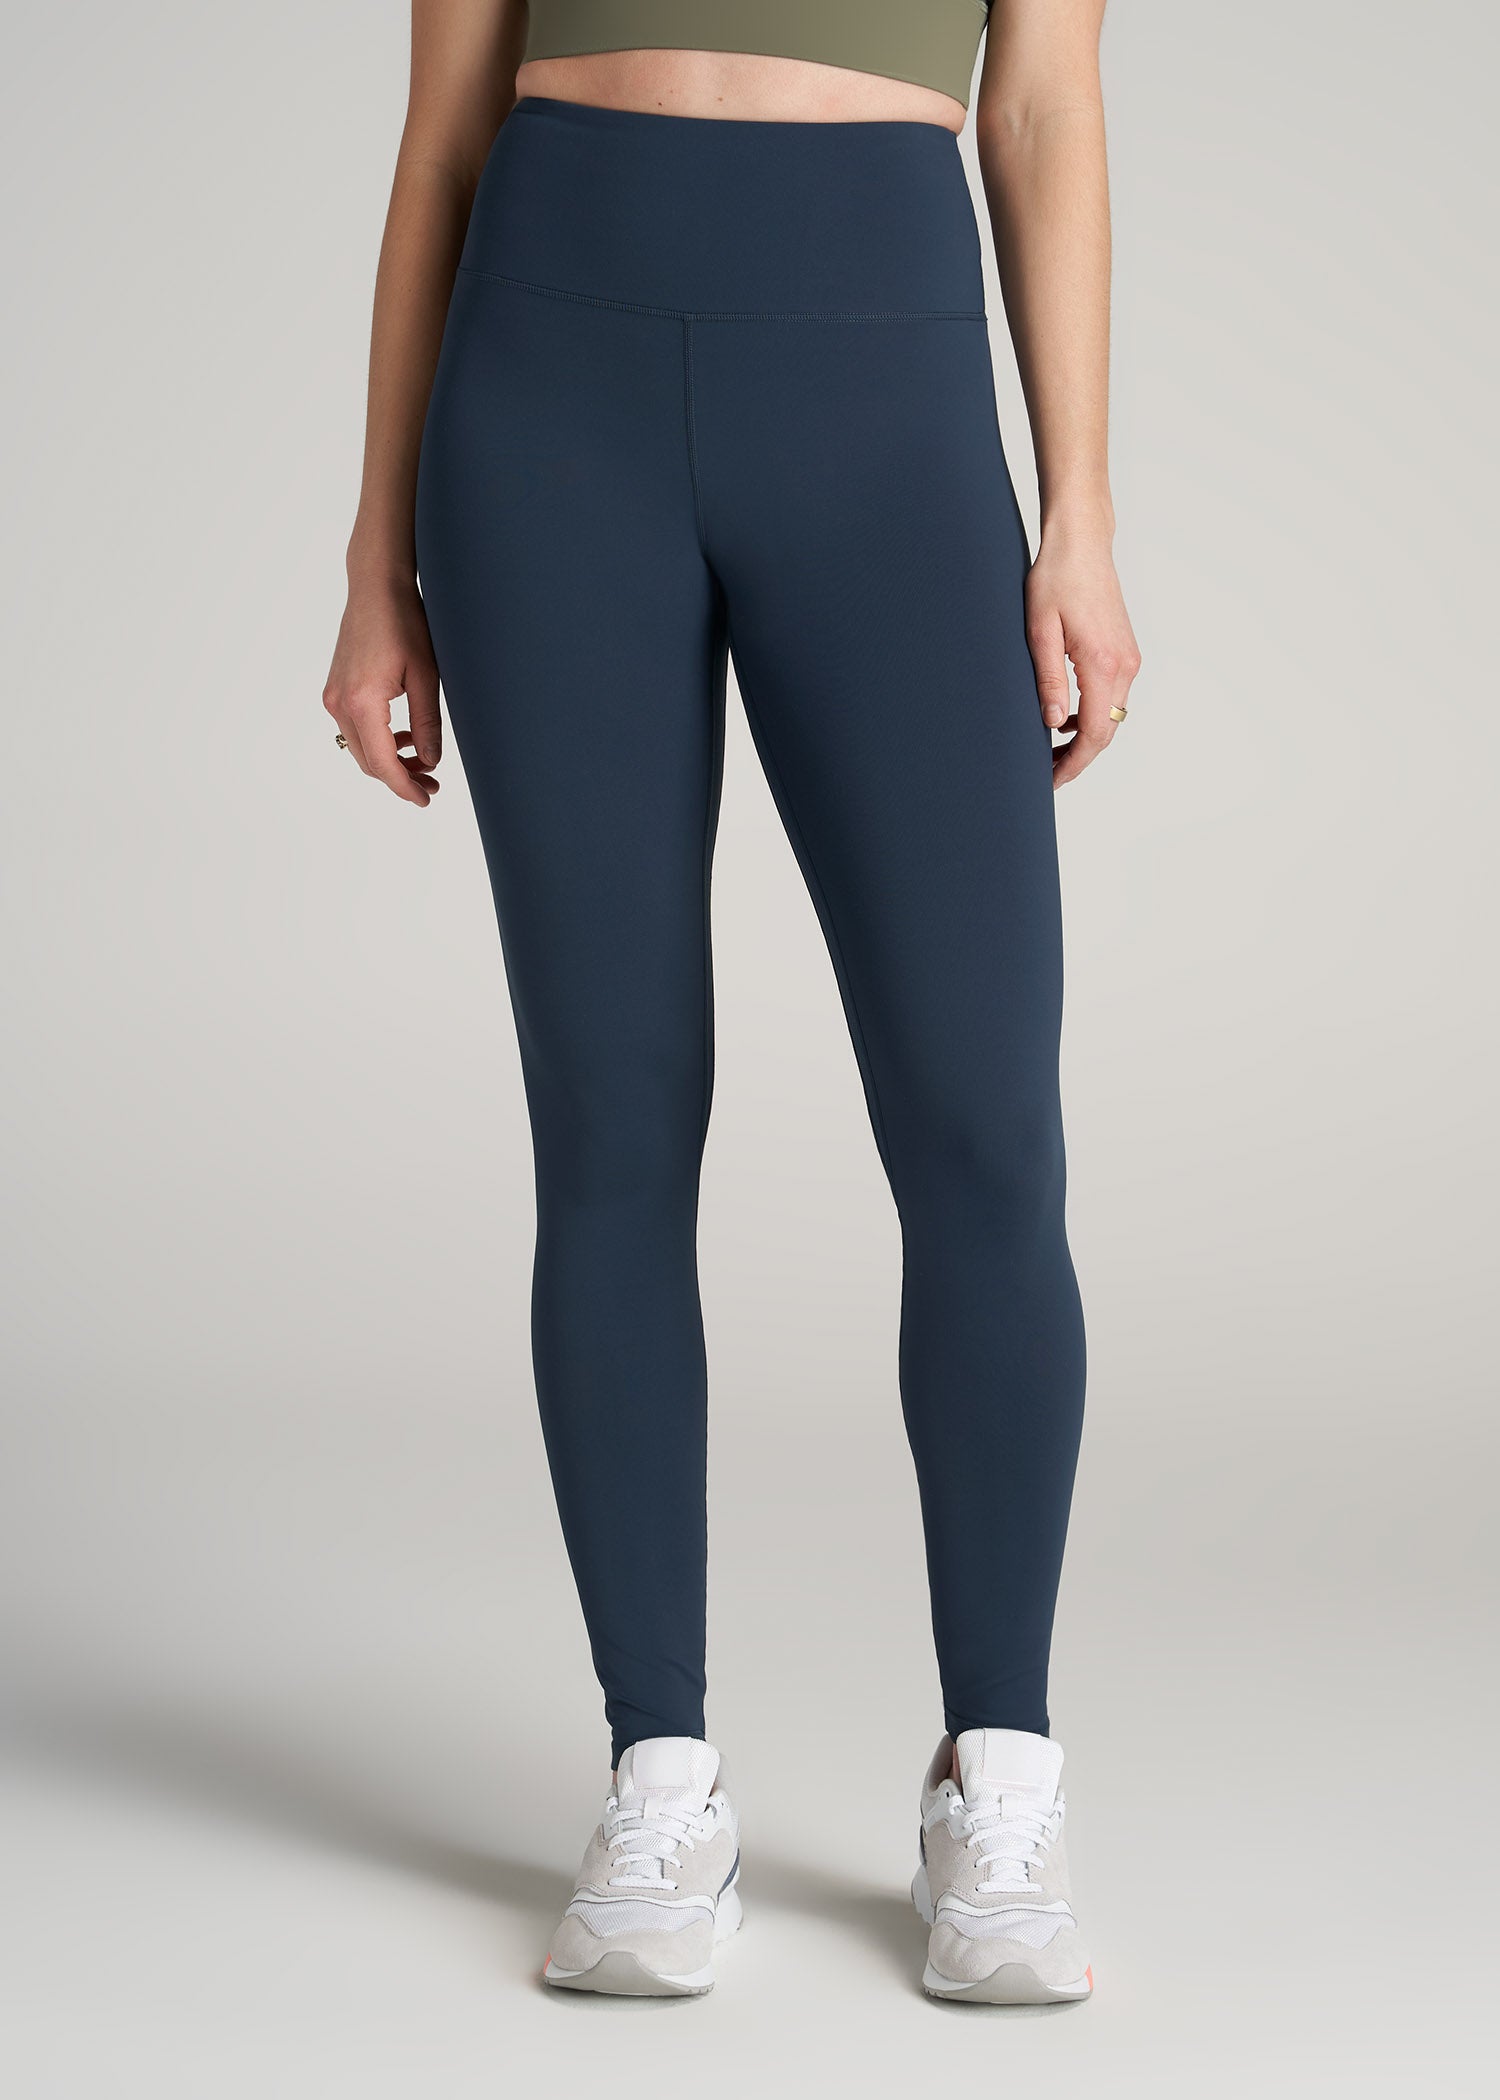 High Waist Cotton Stretch Office Legging - Intouch Clothing